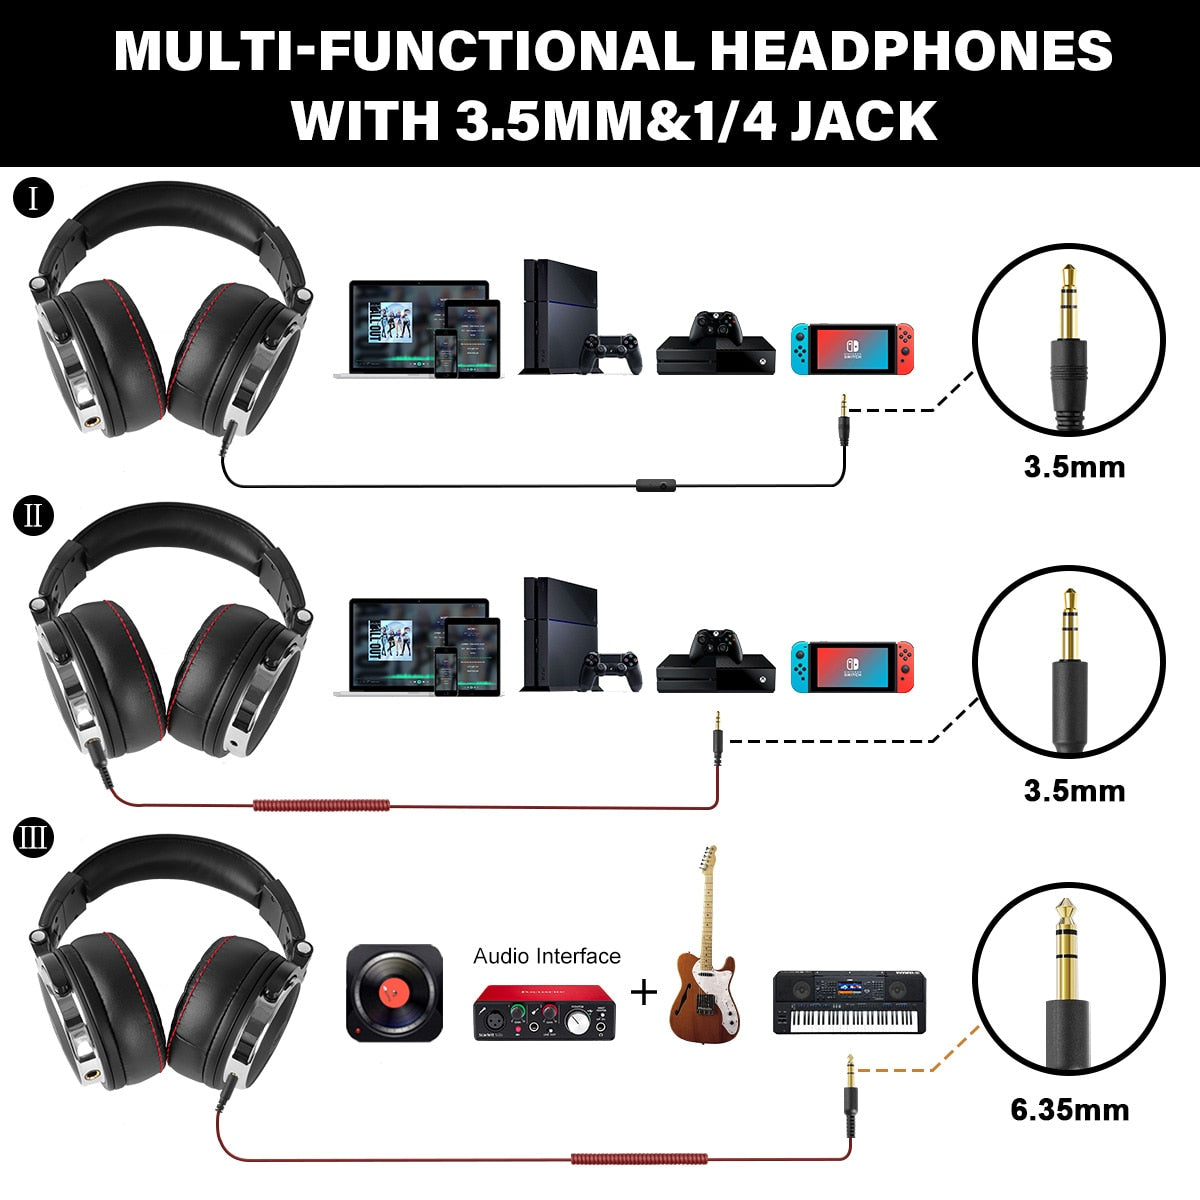 Oneodio Foldable Over-Ear Wired Headphone For Phone Computer PC Professional Studio Pro 30 50 Monitor DJ Headset Gaming Earphone